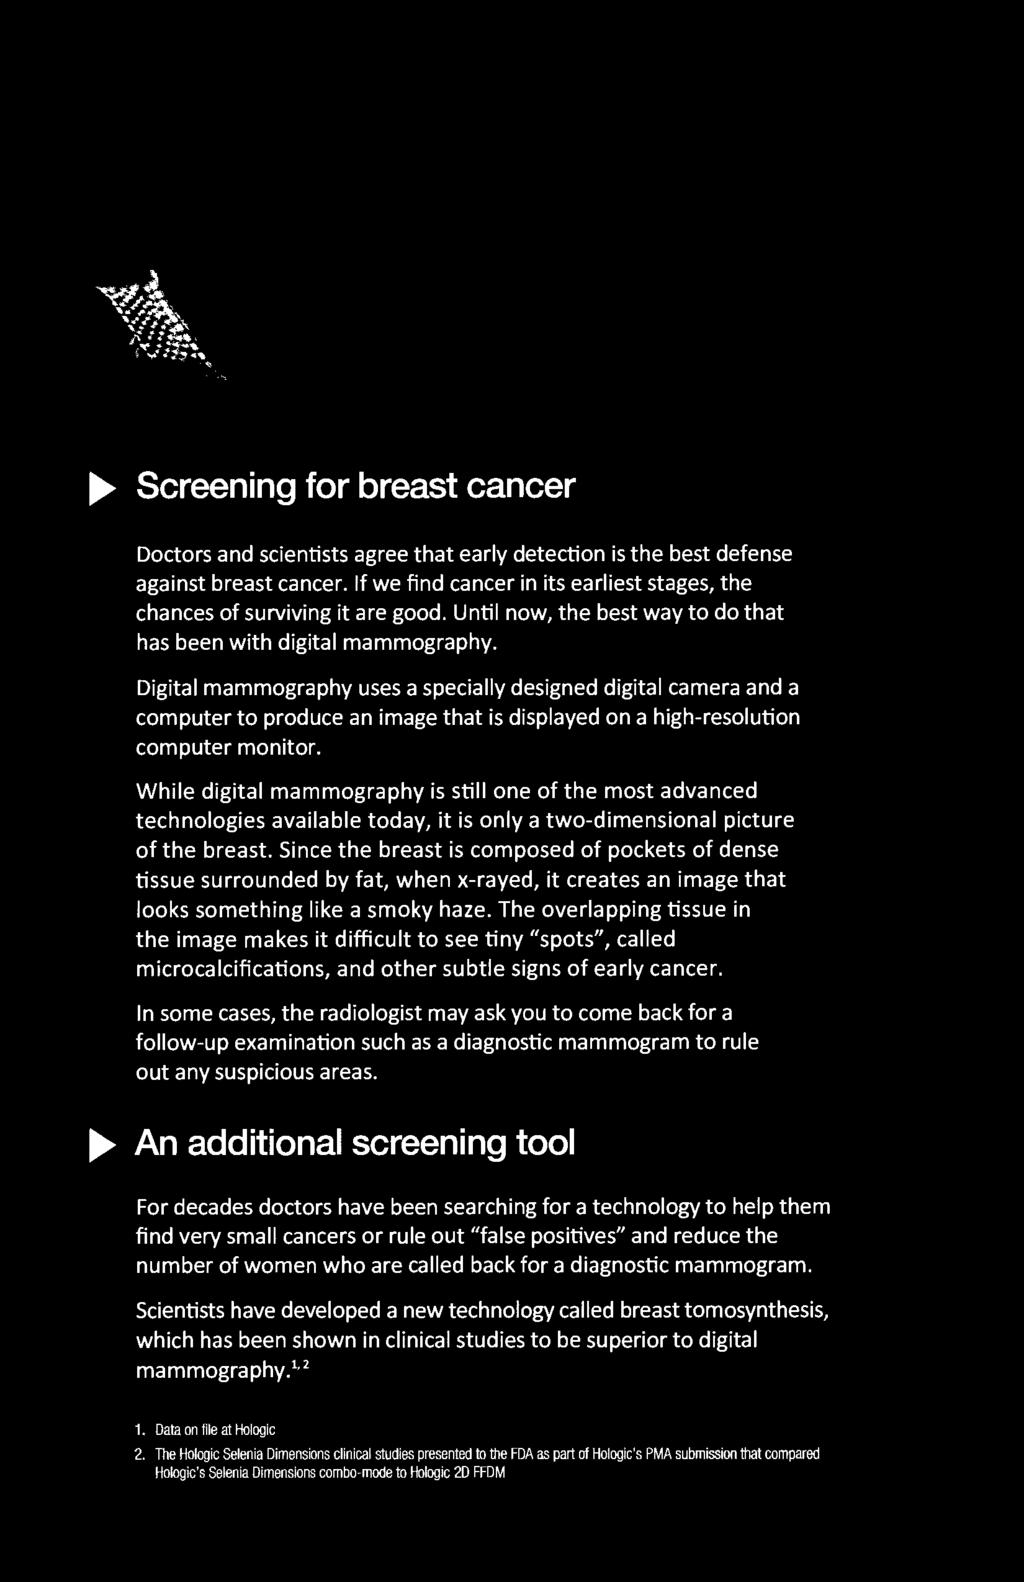 Since the breast is composed of pockets of dense tissue surrounded by fat, when x-rayed, it creates an image that looks something like a smoky haze.